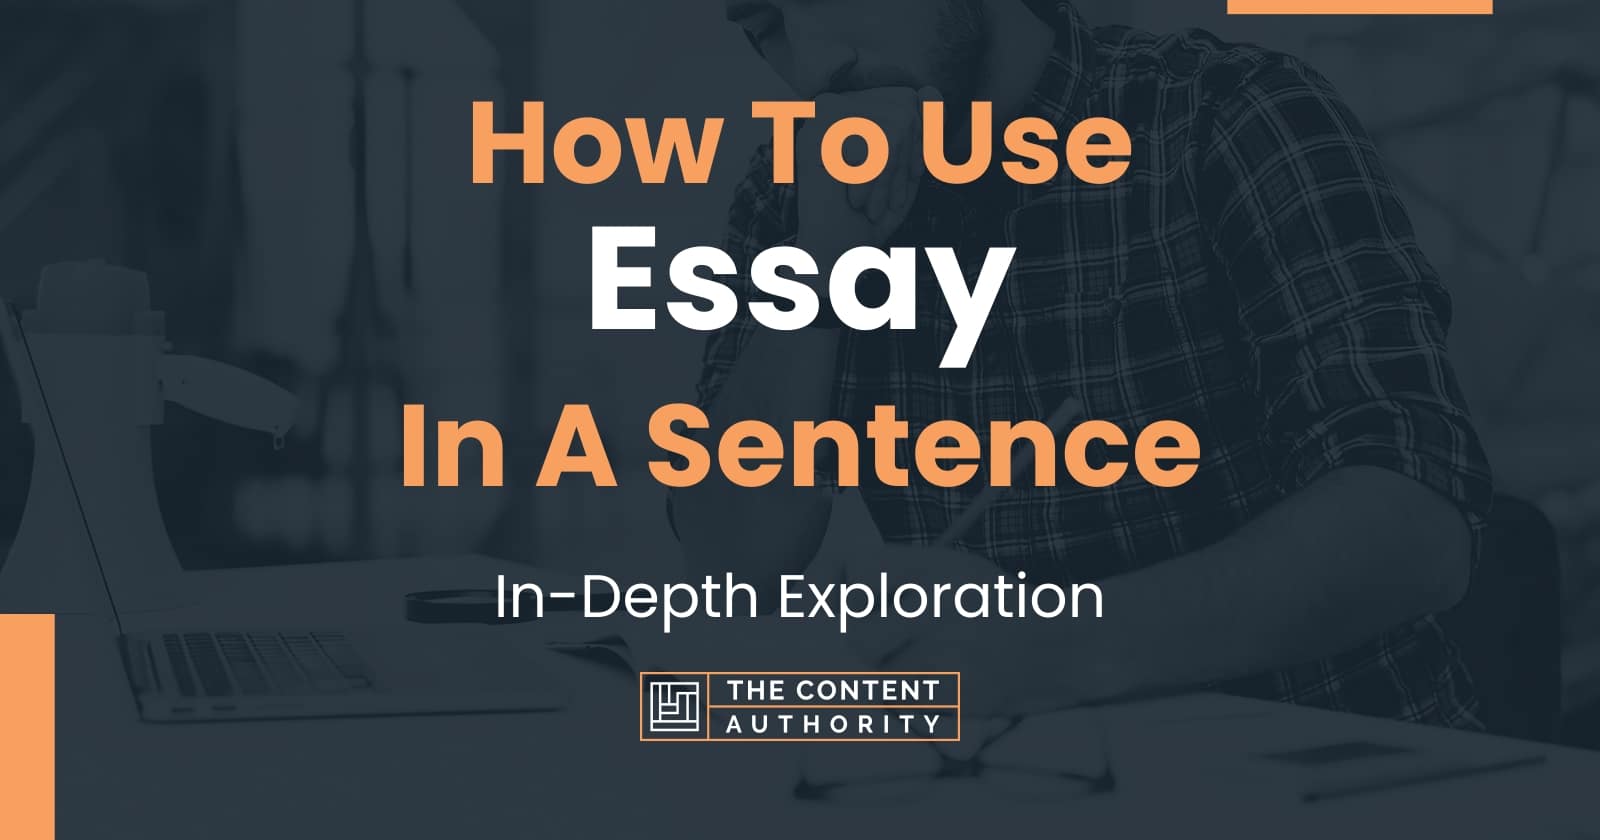 use word essay in sentence